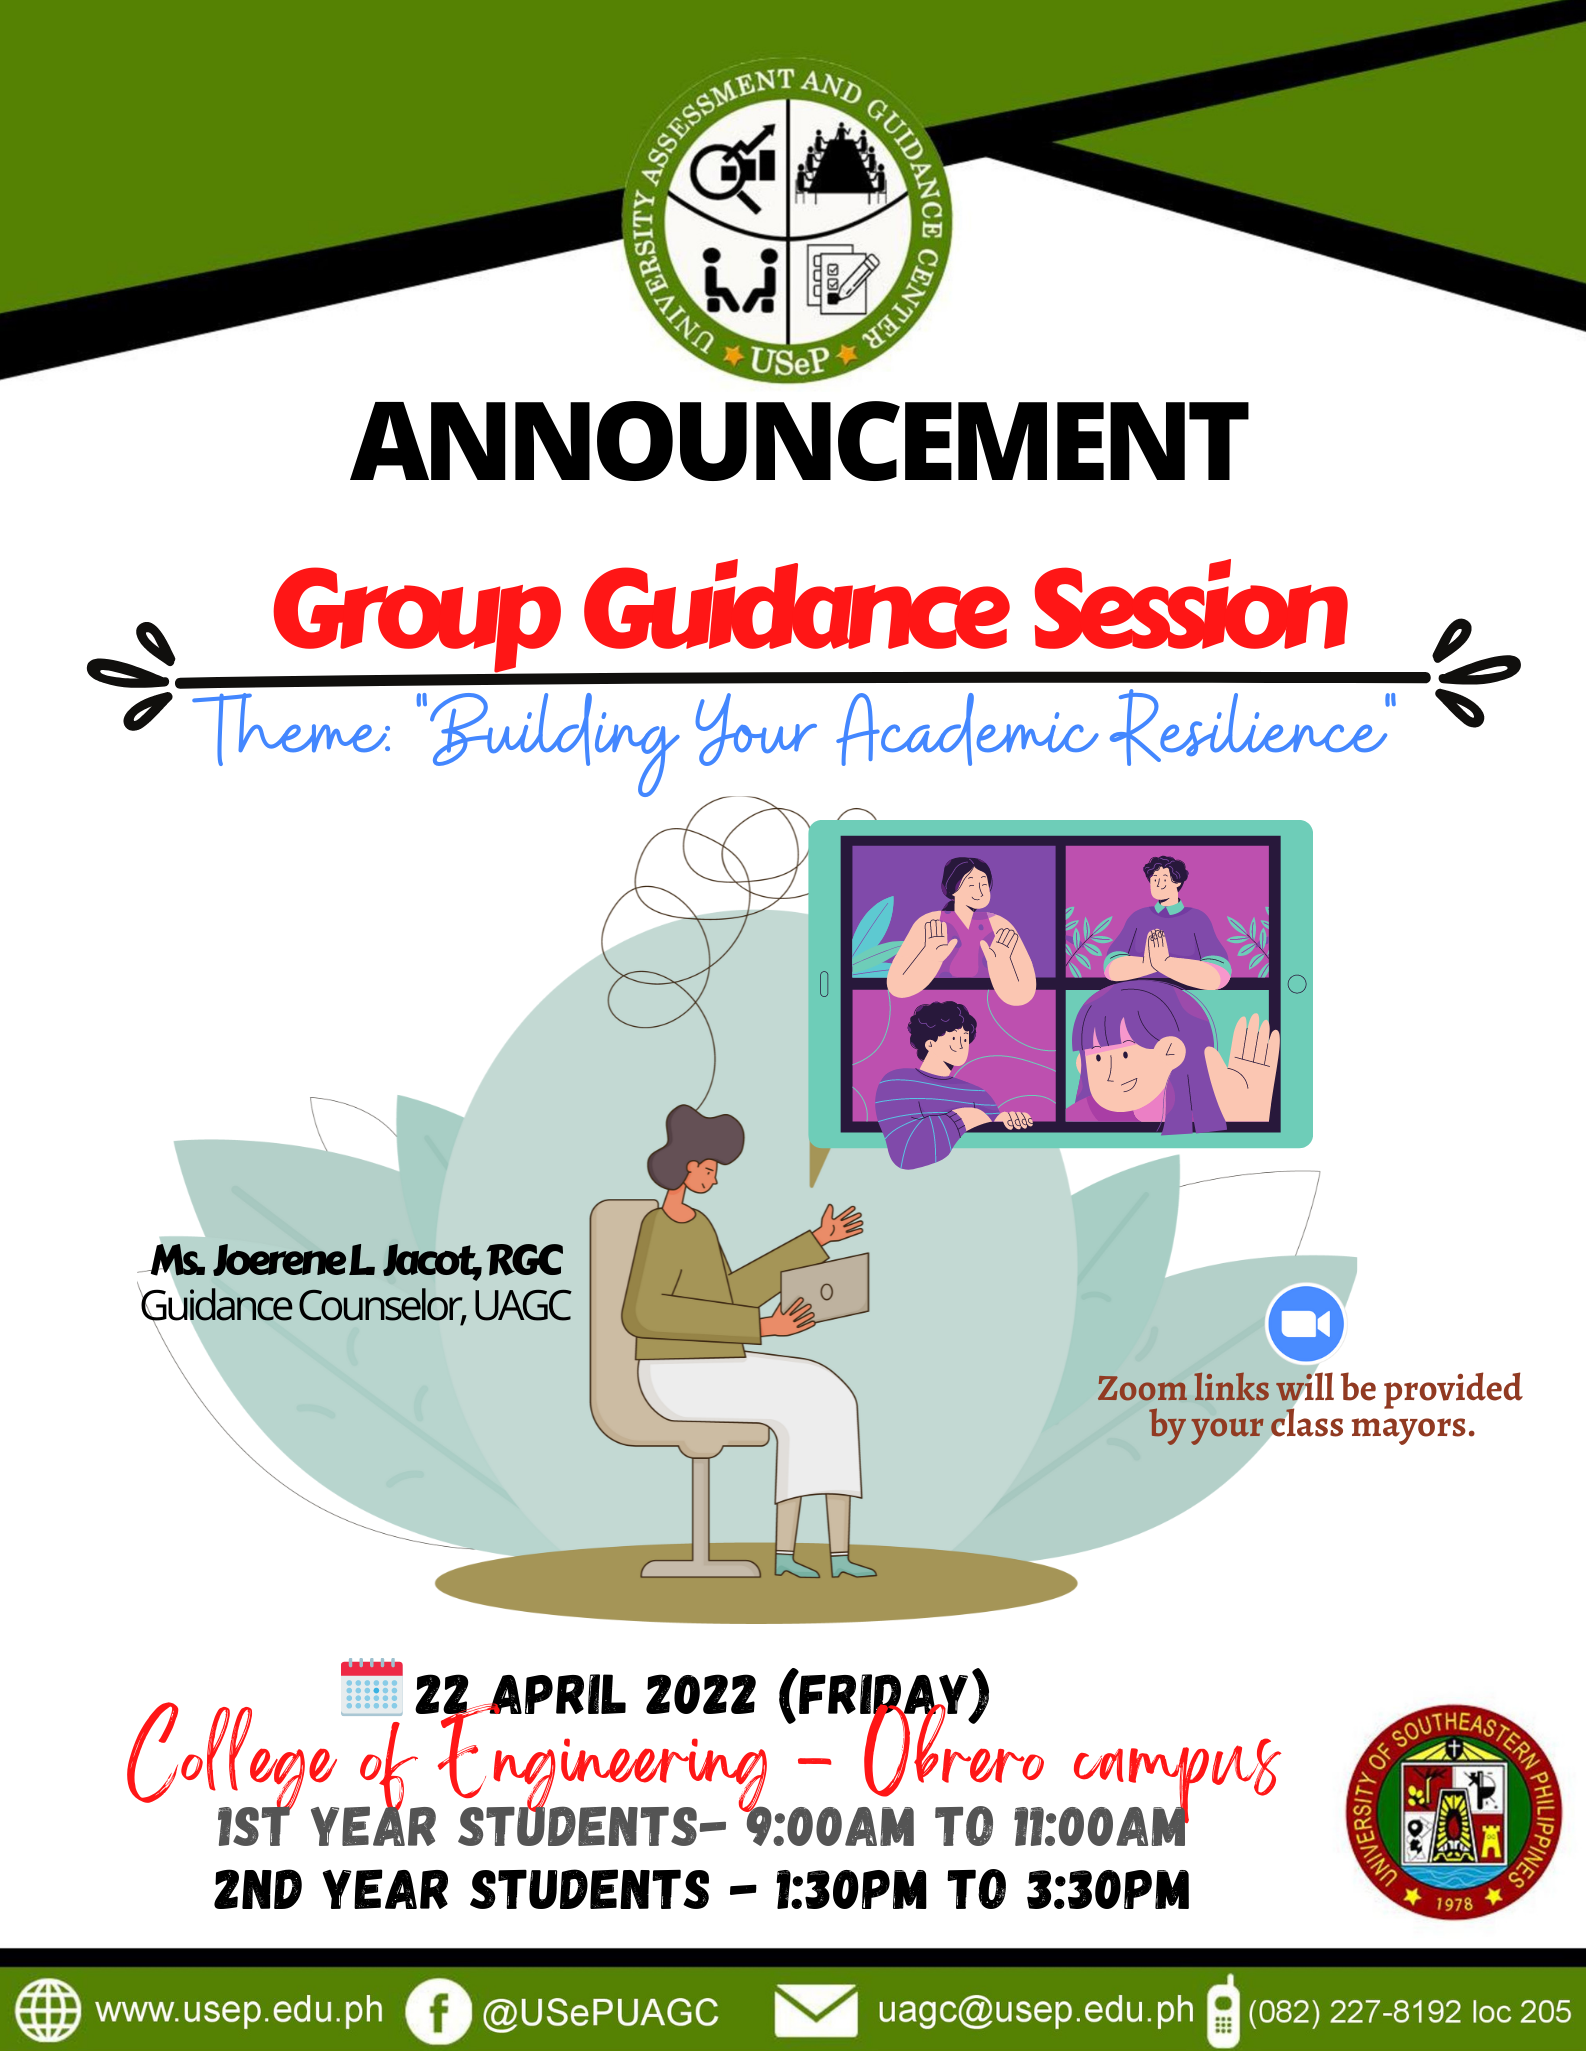 “Building Your Academic Resilience” – A Group Guidance Session